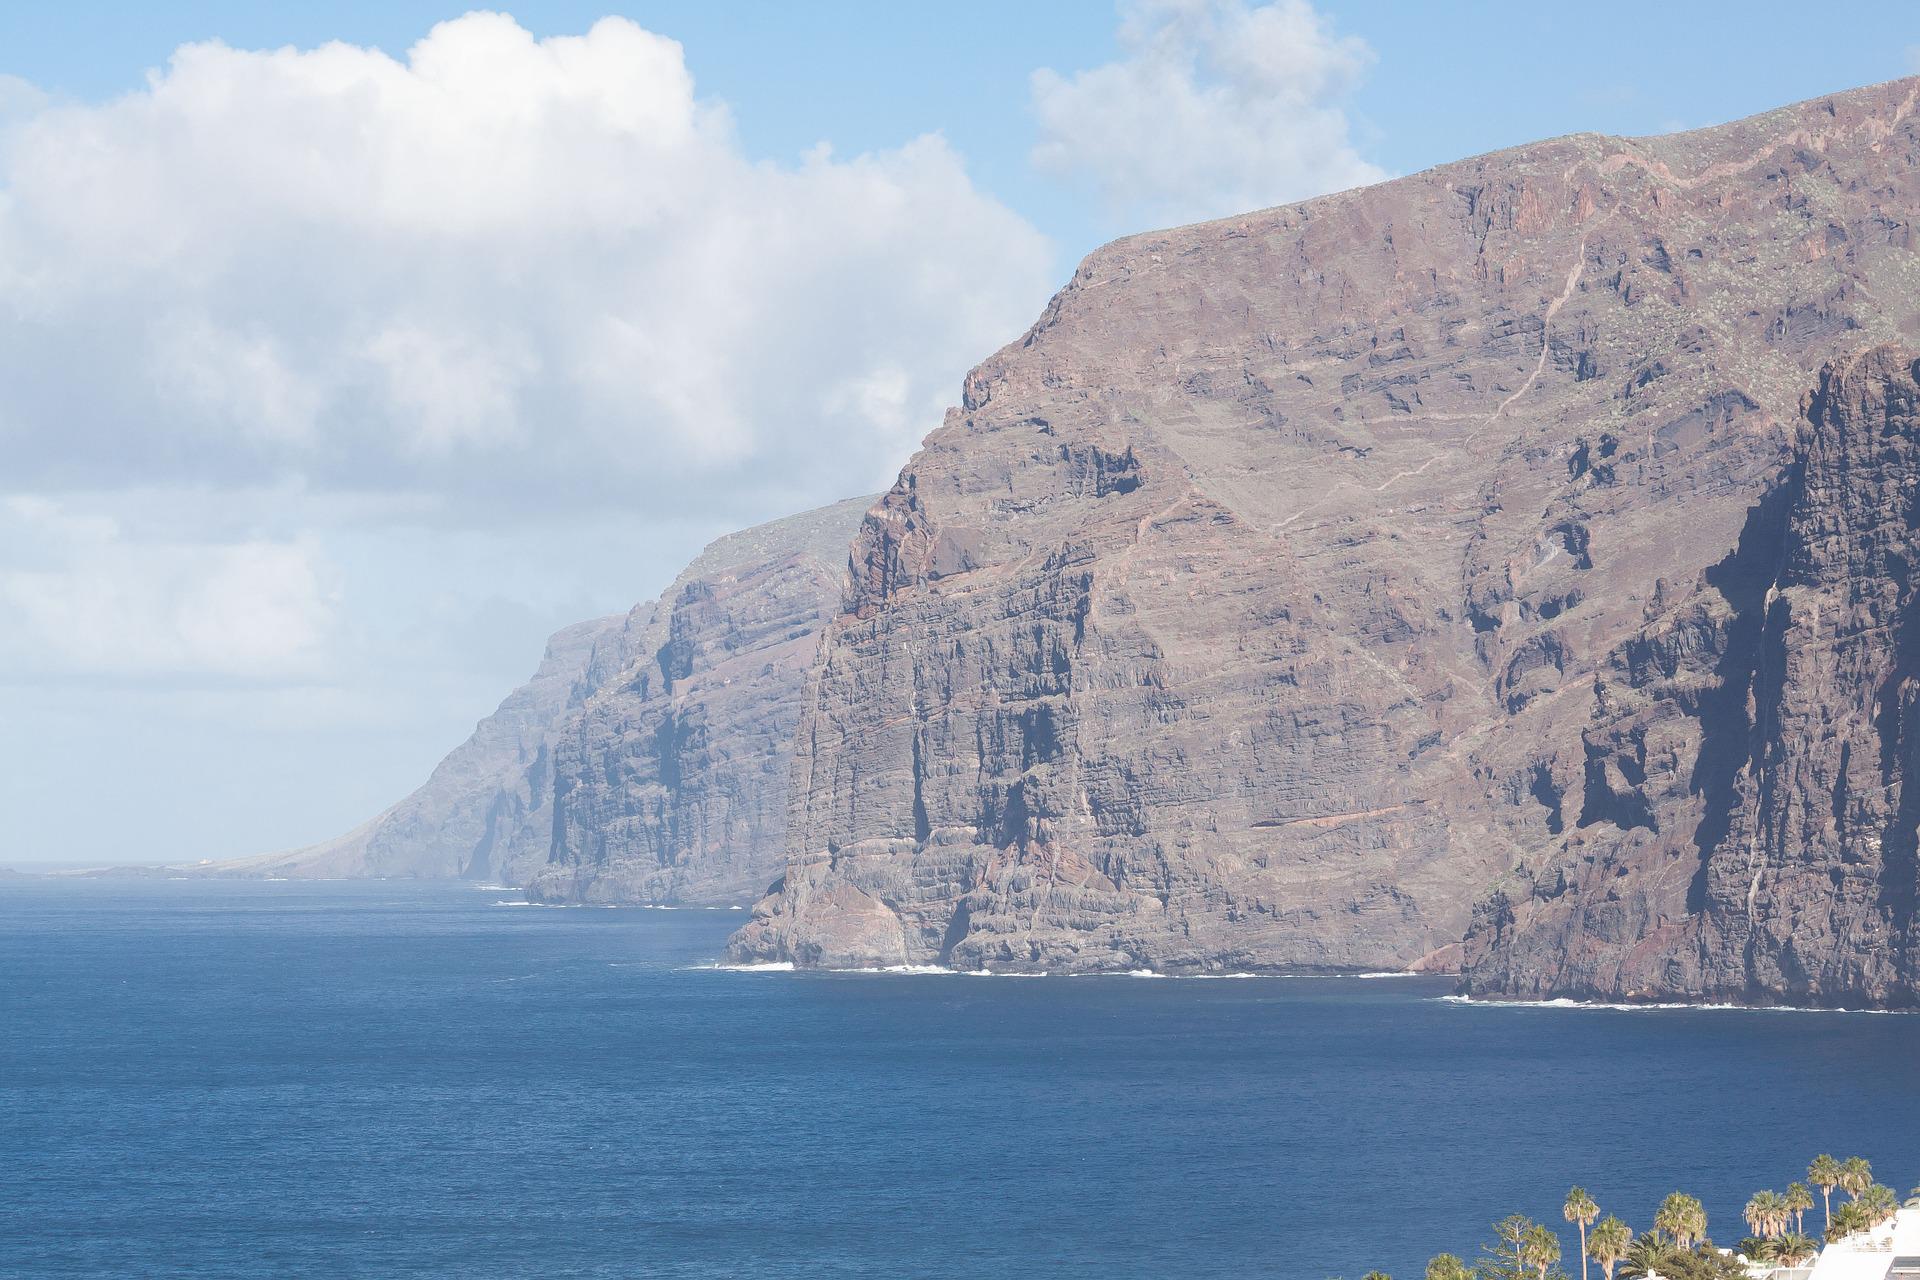 How To Get From South Tenerife Airport To Los Gigantes - All Possible Ways, cheapest way from Tenerife airport to Los Gigantes, Tenerife airport to Los Gigantes, Tenerife airport to Los Gigantes, Tenerife airport to Los Gigantes, Tenerife Bus Airport, bus from Tenerife airport to Los Gigantes, taxi Tenerife airport to Los Gigantes, Uber Tenerife airport to Los Gigantes, Tenerife airport to Los Gigantes by bus, Tenerife airport to Los Gigantes, Tenerife to Los Gigantes, Titsa bus fare Tenerife airport to Los Gigantes, Tenerife airport to Los Gigantes, Day Travel Card Tenerife, Titsa Bus Day Travel Card